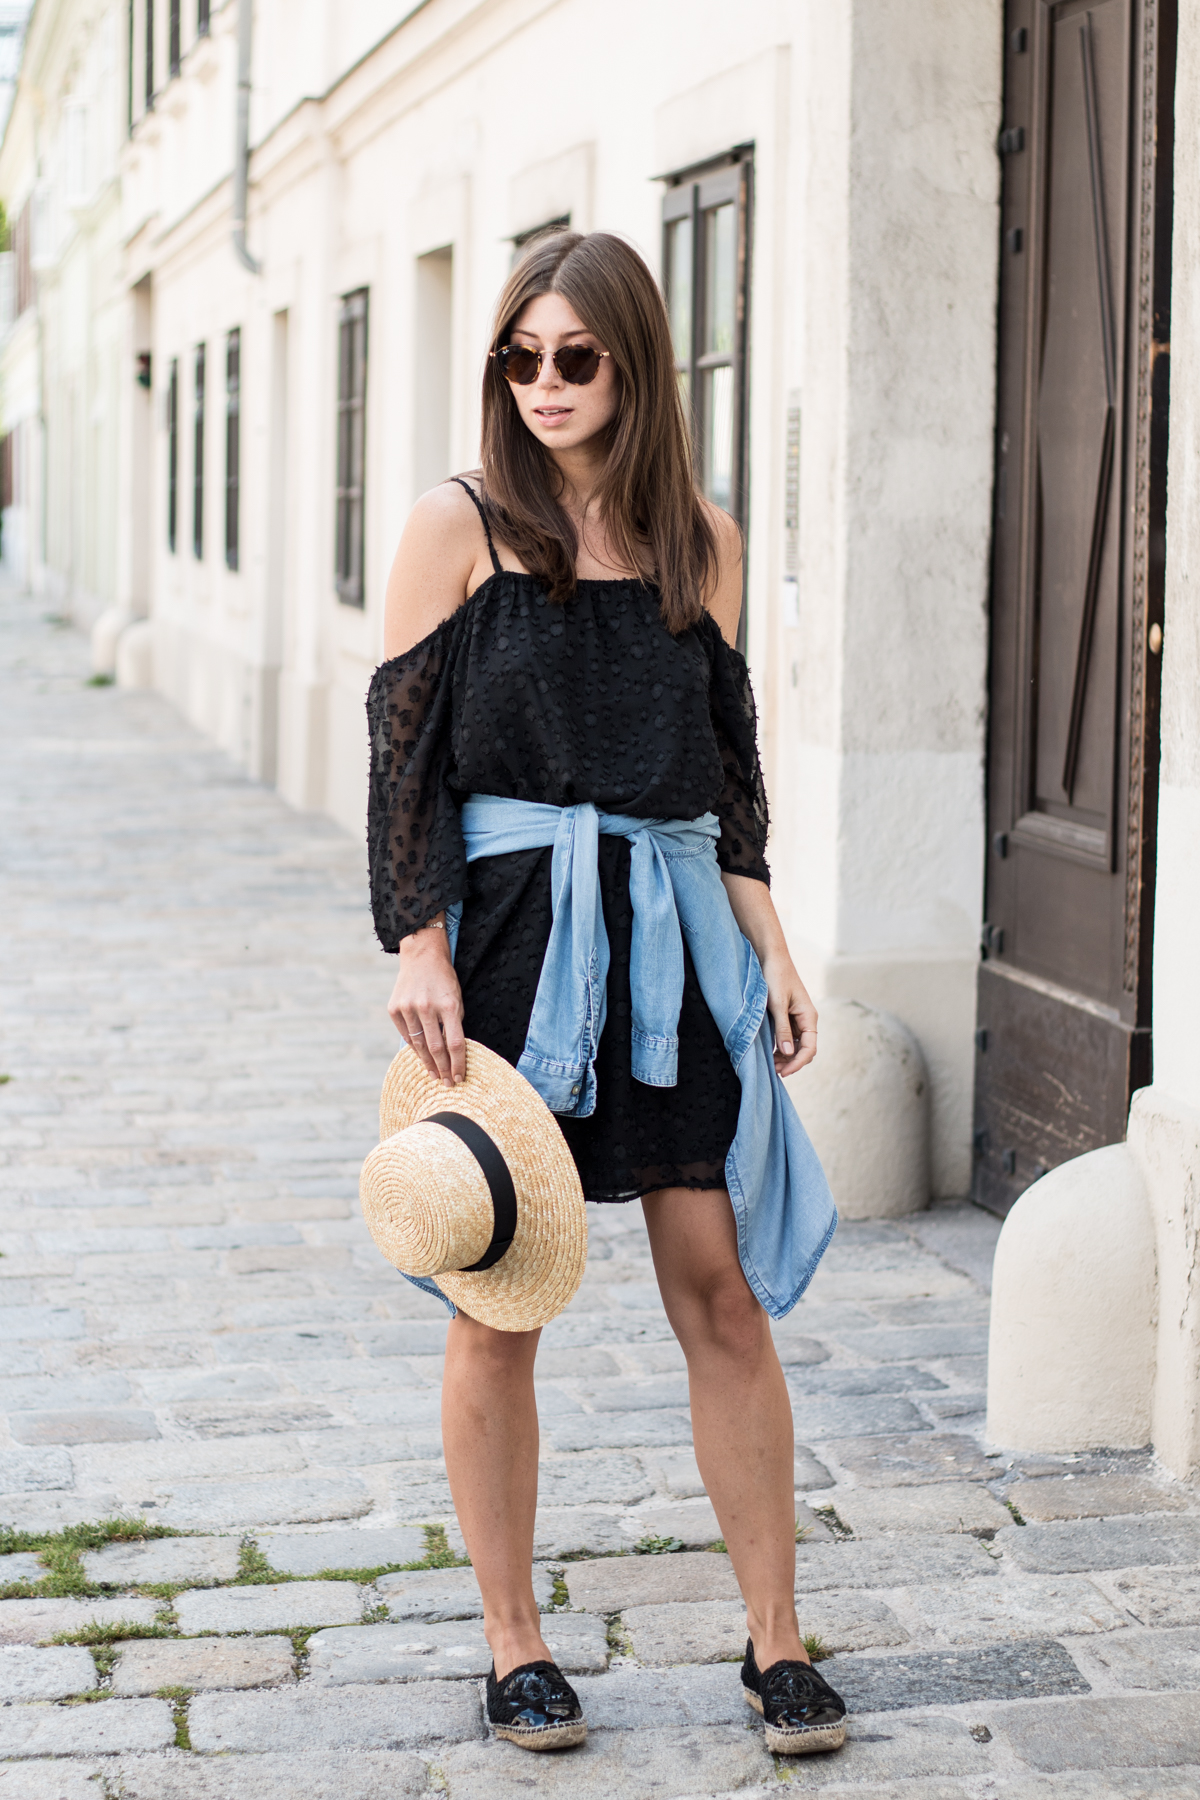 LBD Dressed Down | The Daily Dose